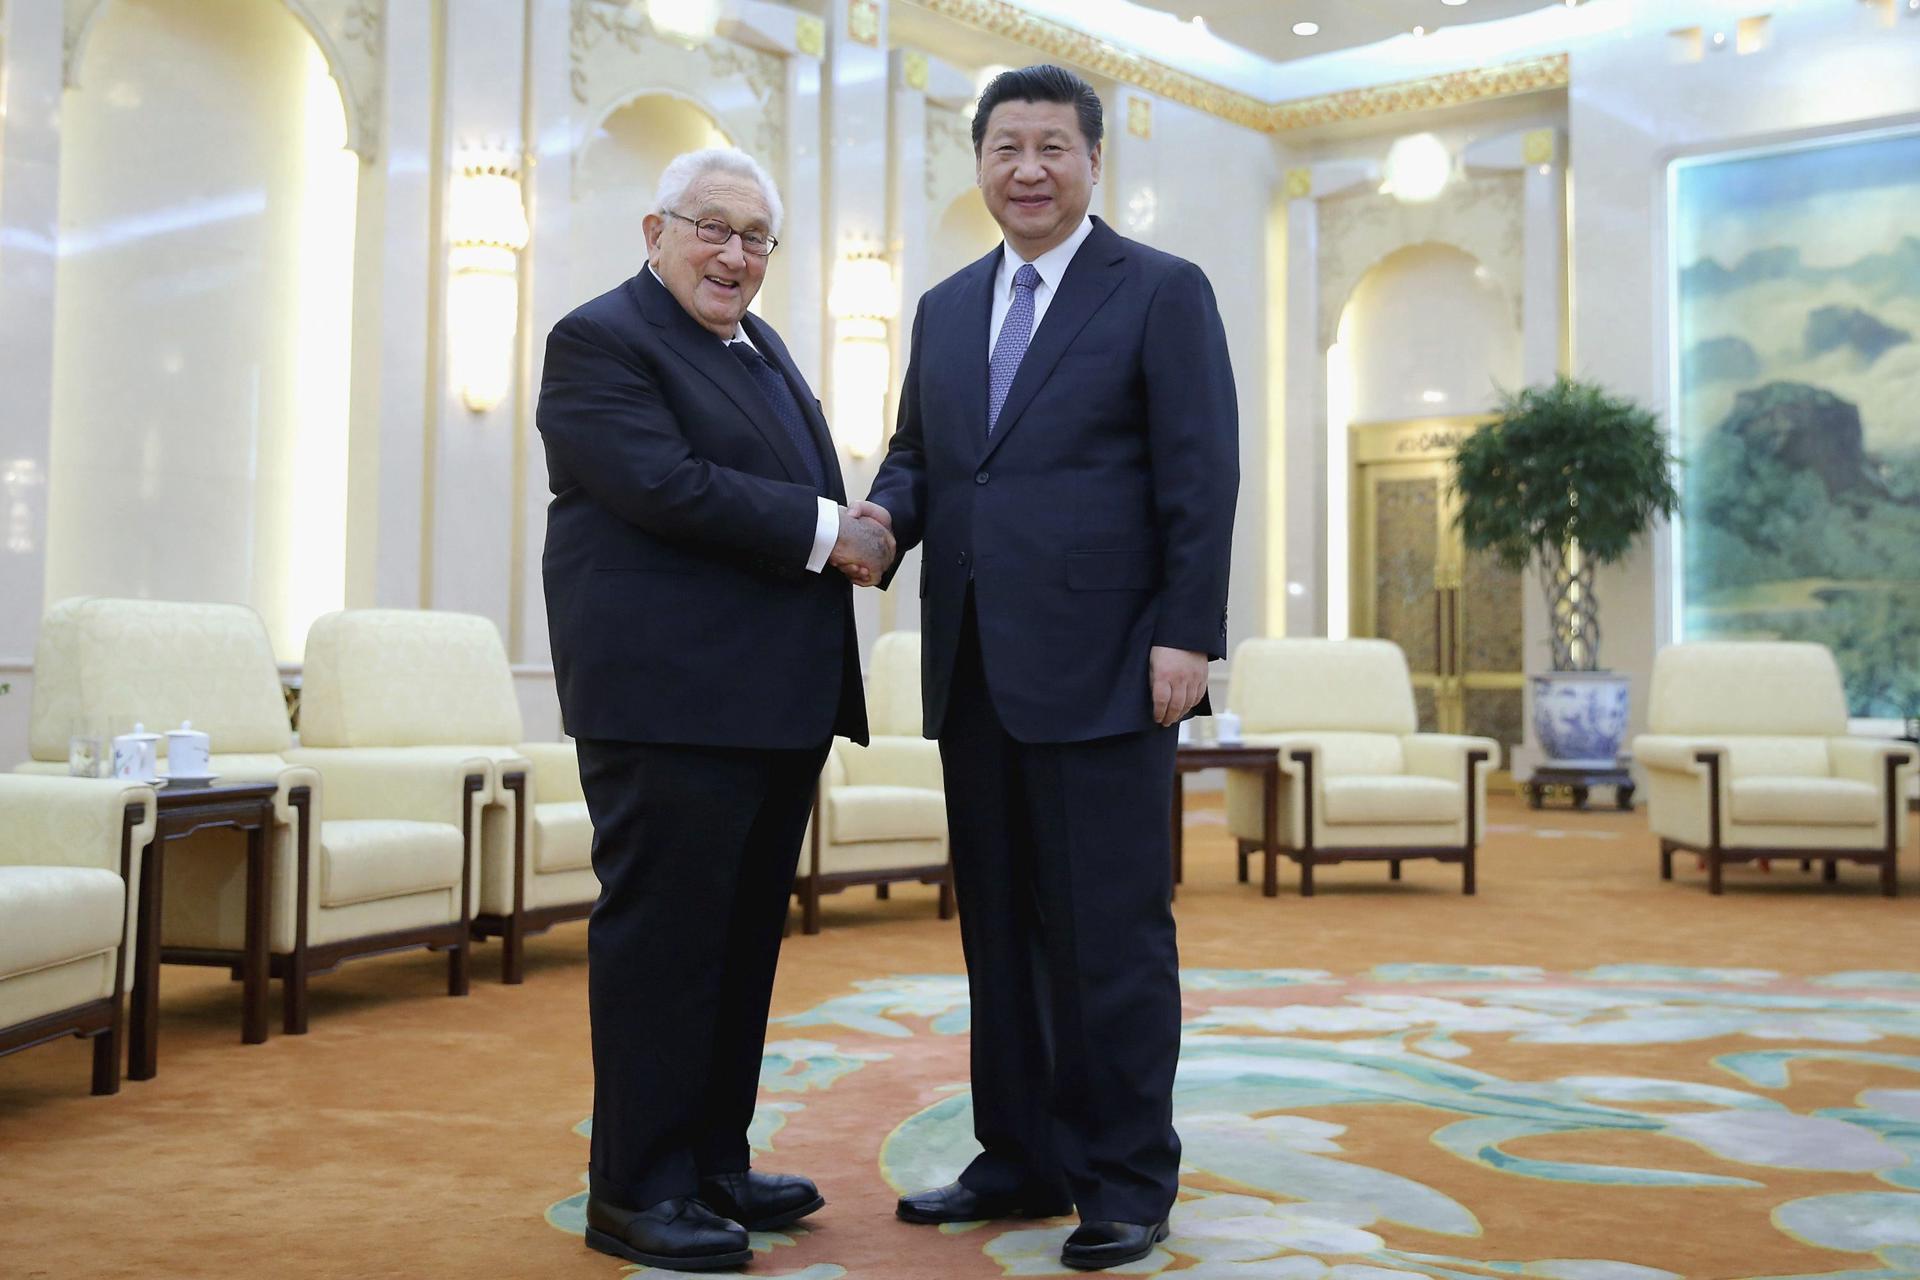 China's President Xi Jinping (right) shakes hands with former US secretary of state Henry Kissinger at the Great Hall of the People in Beijing, China, Tuesday, March 17, 2015. EFE FILE/Feng Li / Pool
